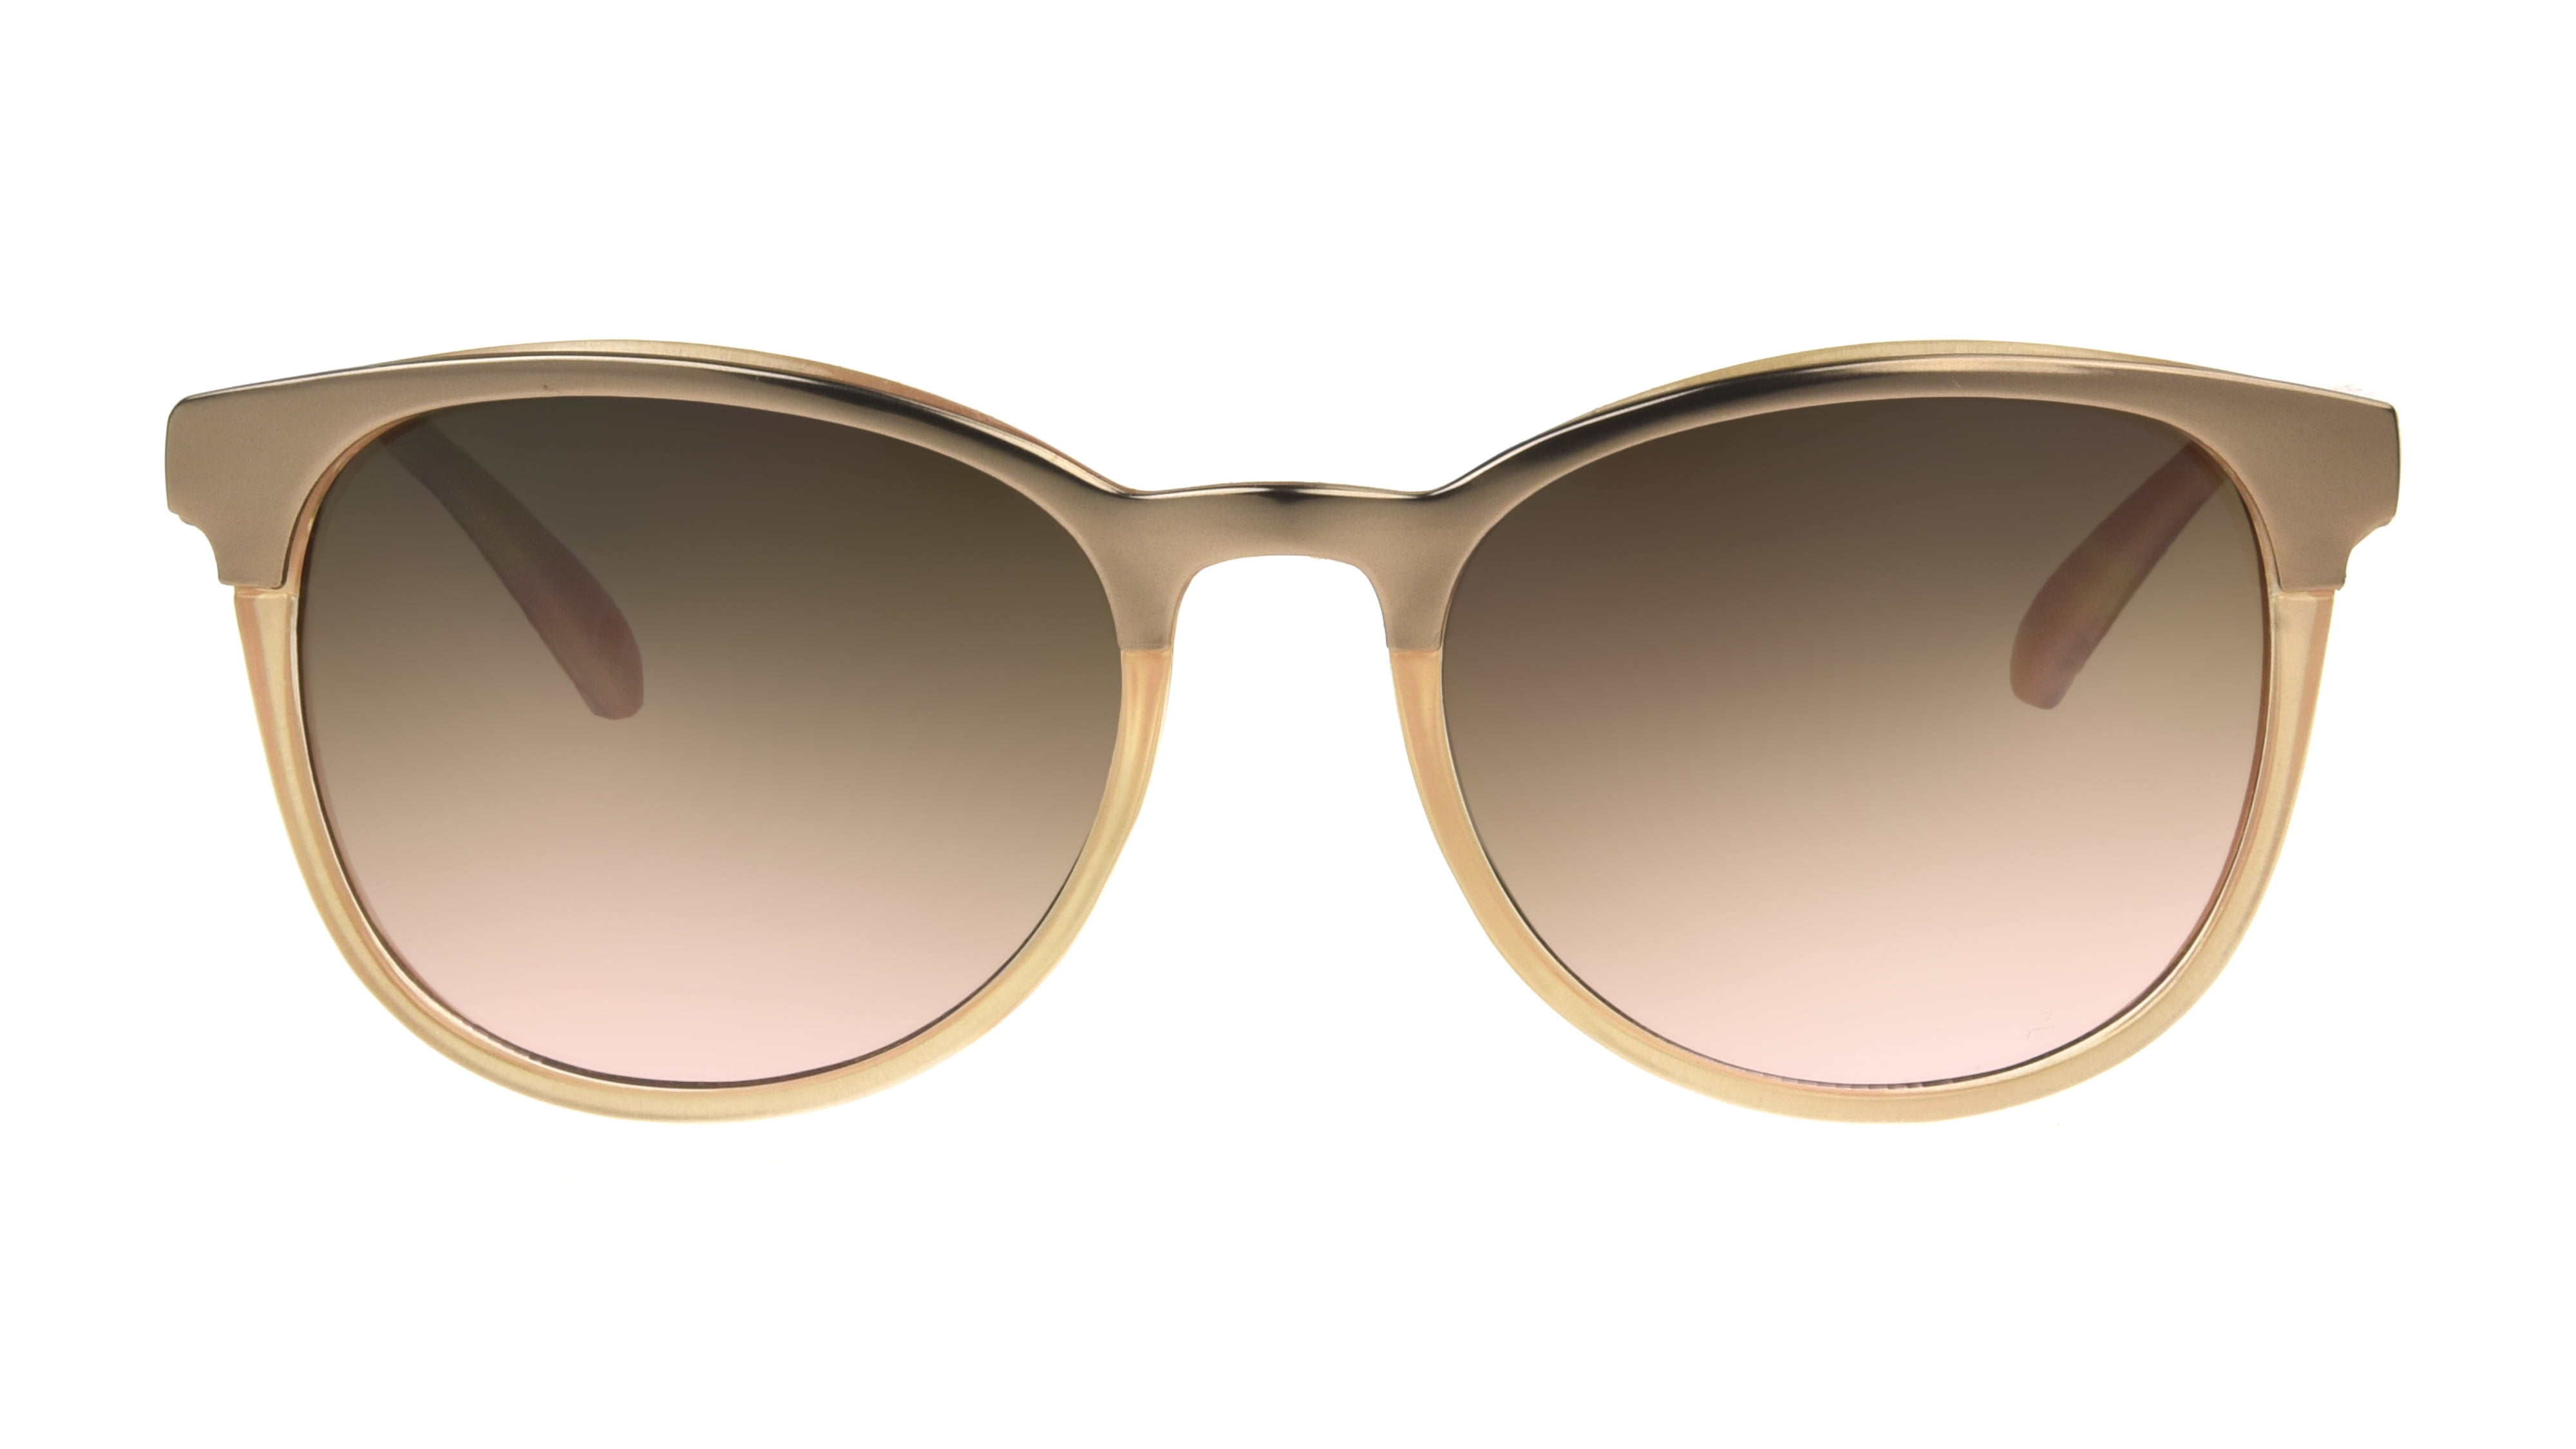 Foster Grant Women's Round Rose Gold adult Sunglasses, Size: One Size